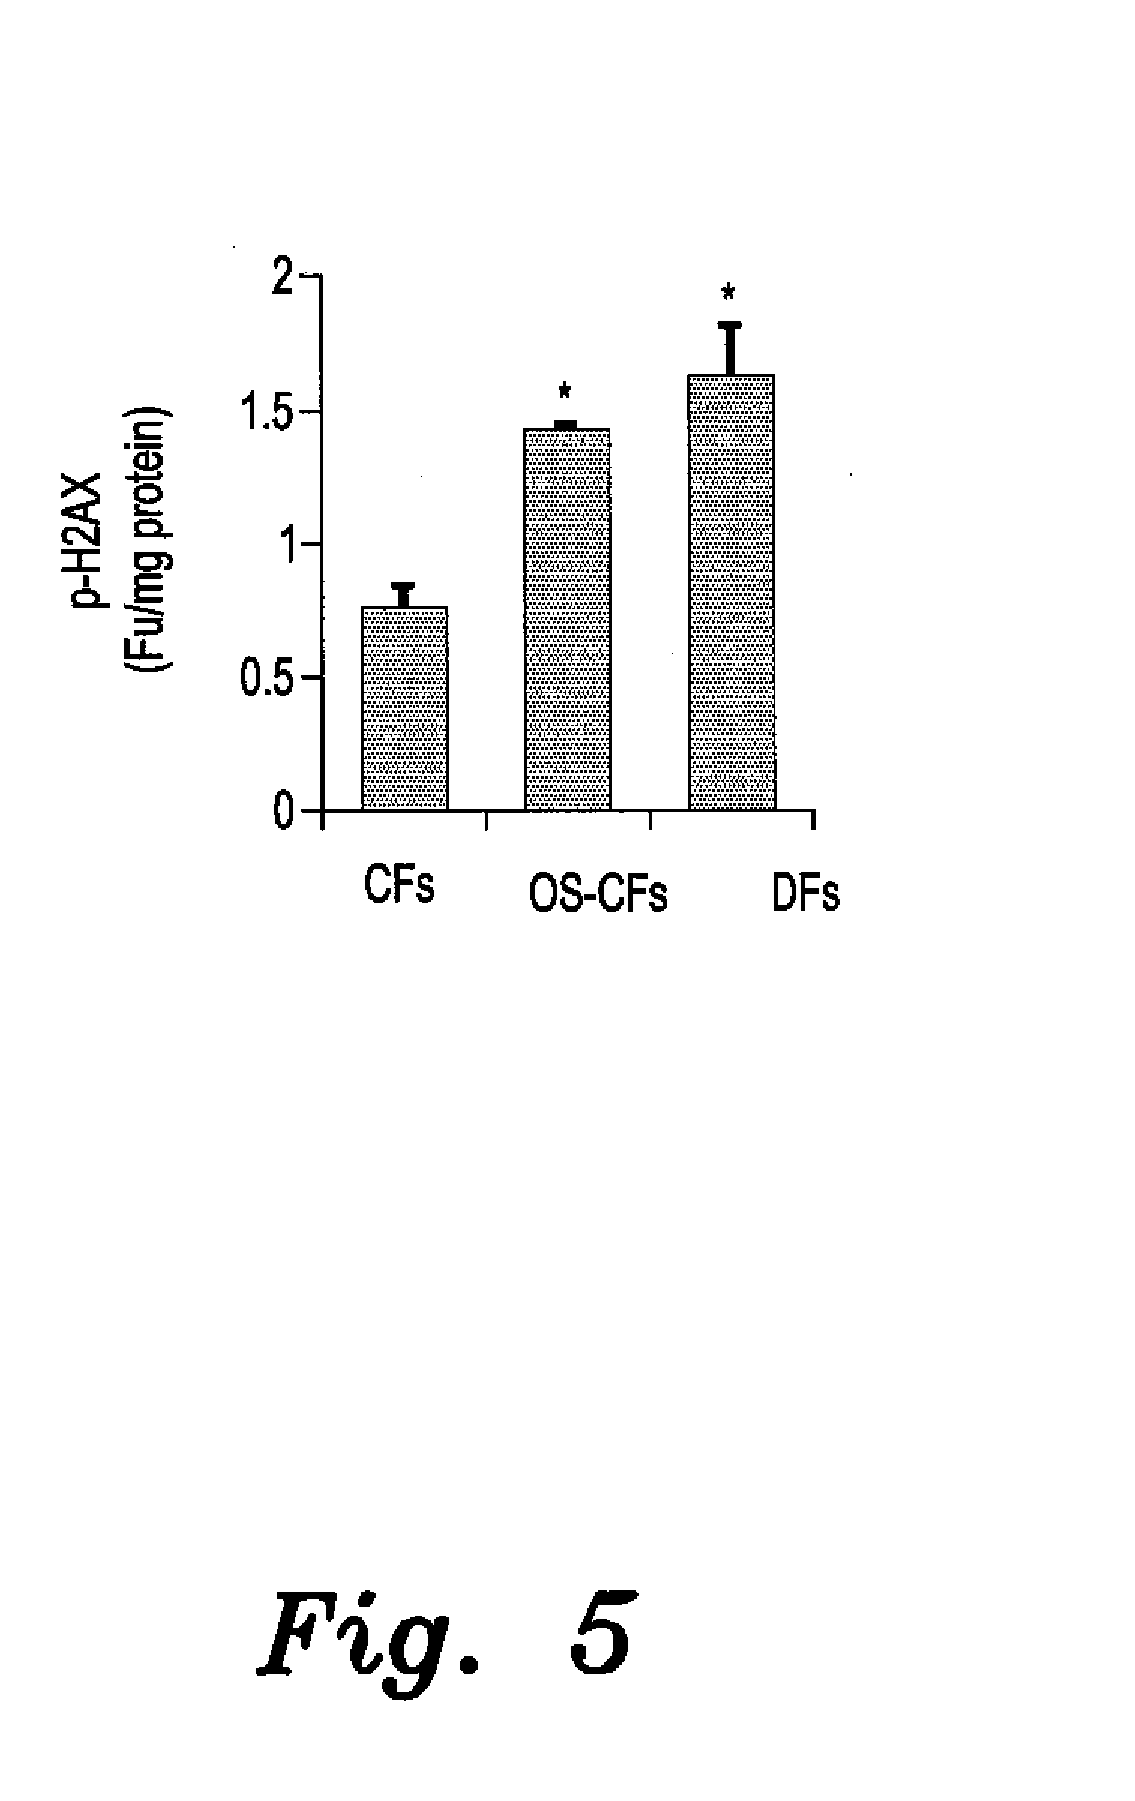 Method of treating delayed healing of a wound associated with diabetes